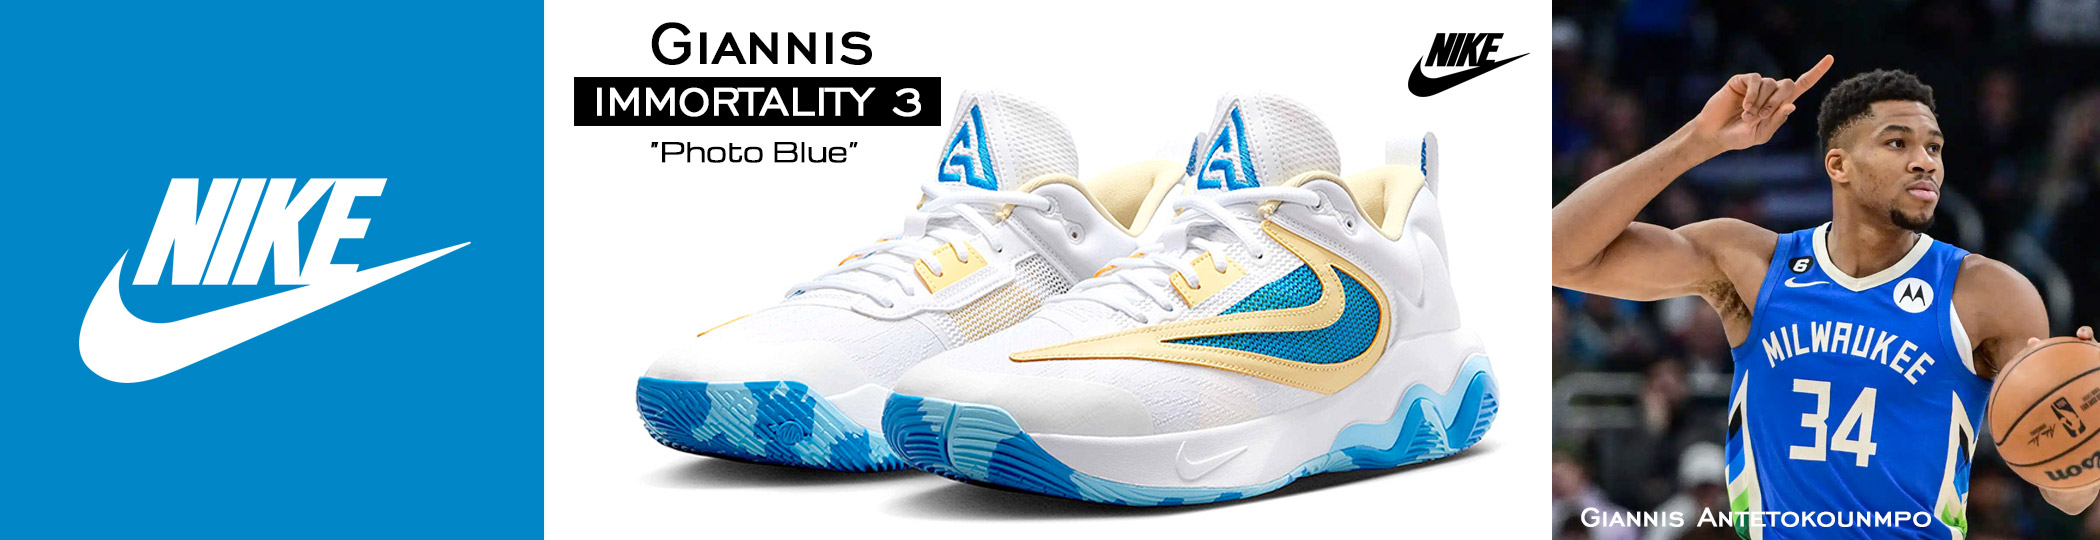 Giannis Immortality 3 - Photo Blue